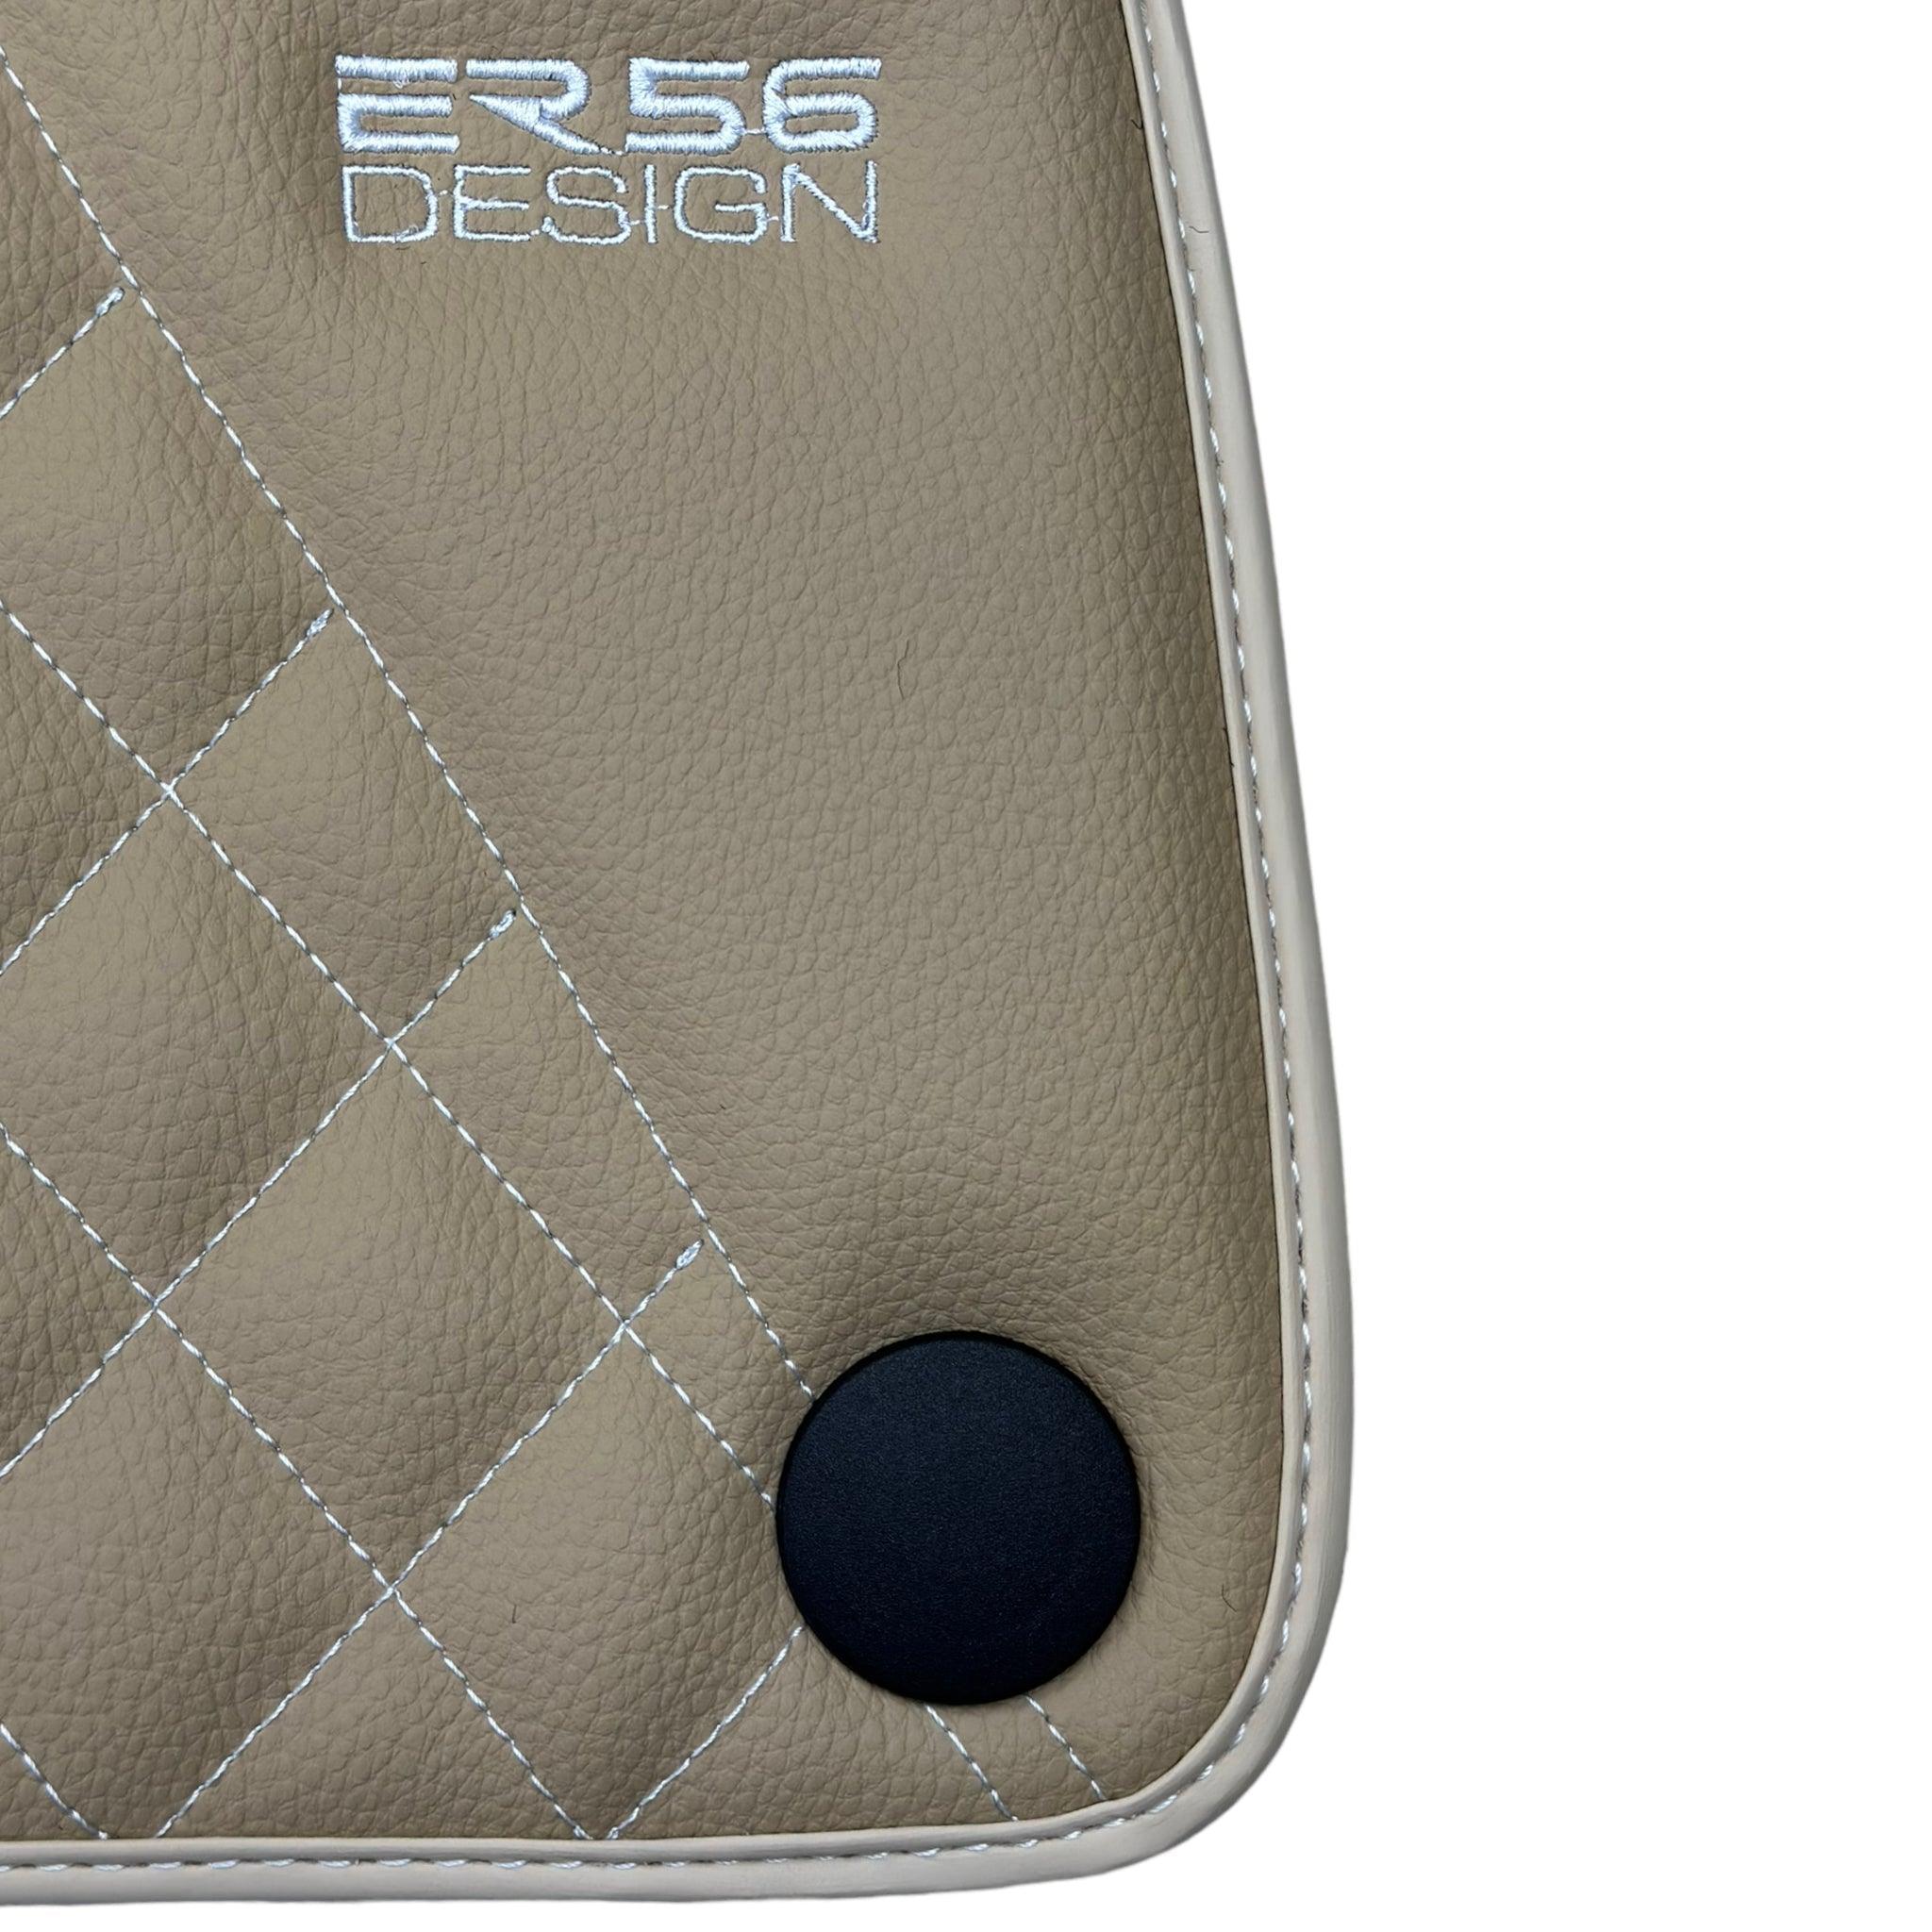 Beige Leather Floor Mats For Mercedes Benz GLE-Class V167 Allrounder - 5 Seats (2019-2023)